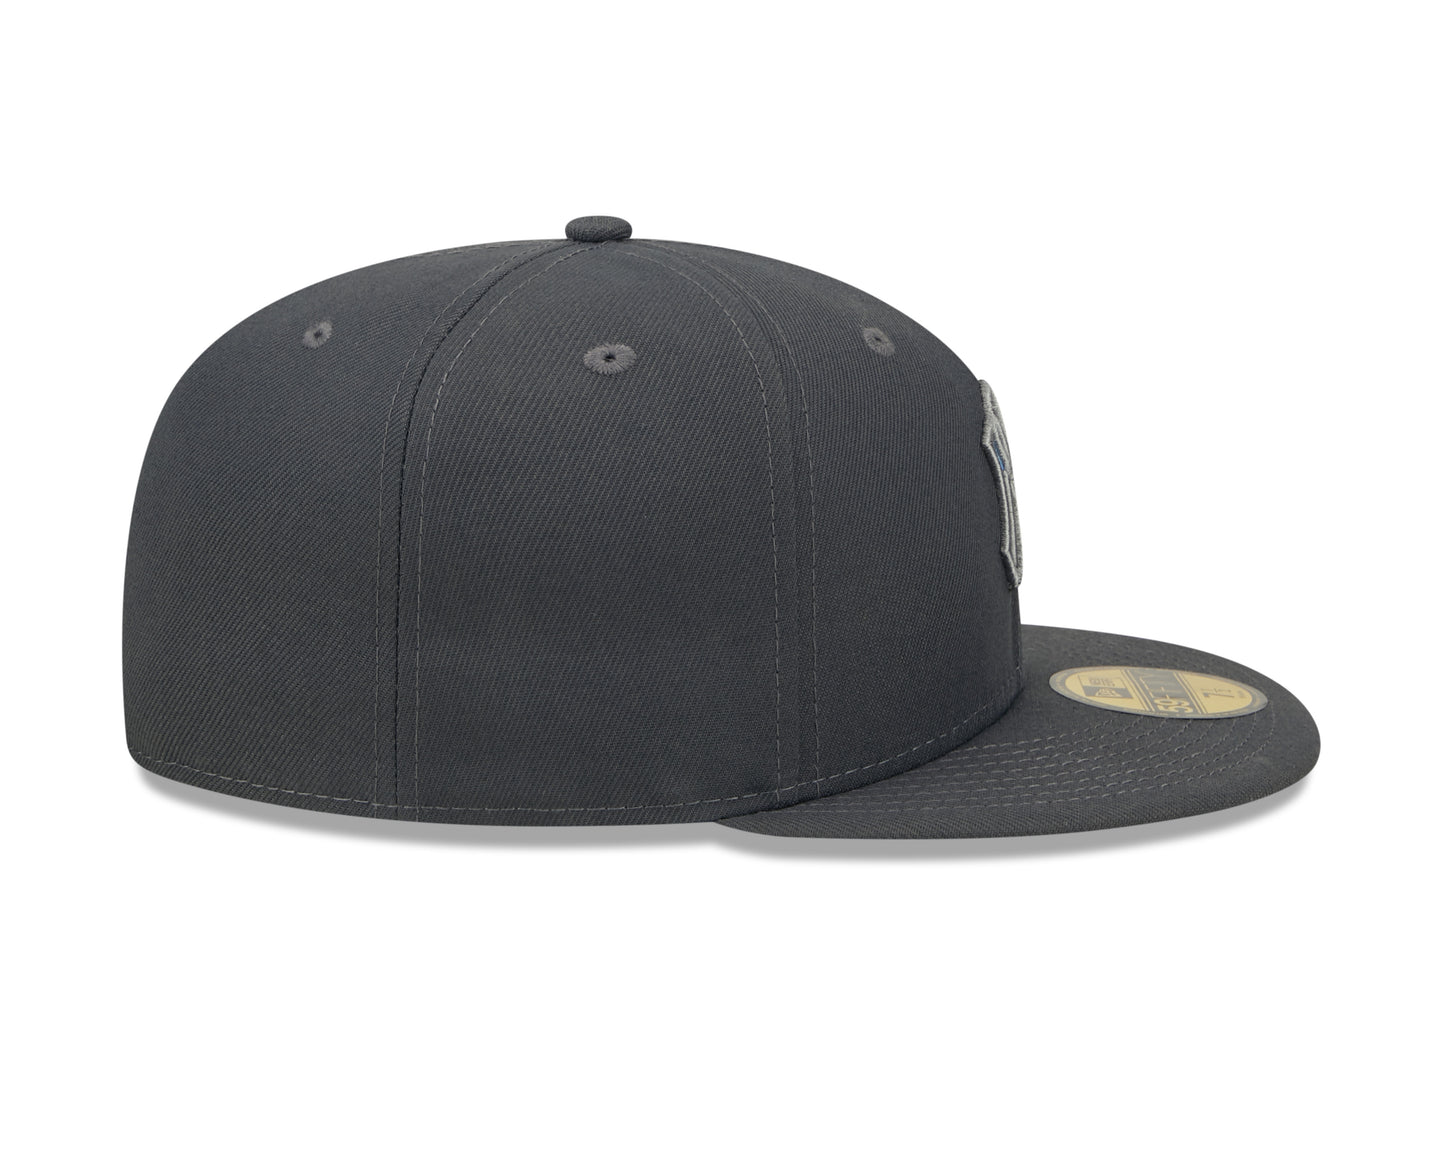 New York Yankees New Era Father's Day 59Fifty Hat